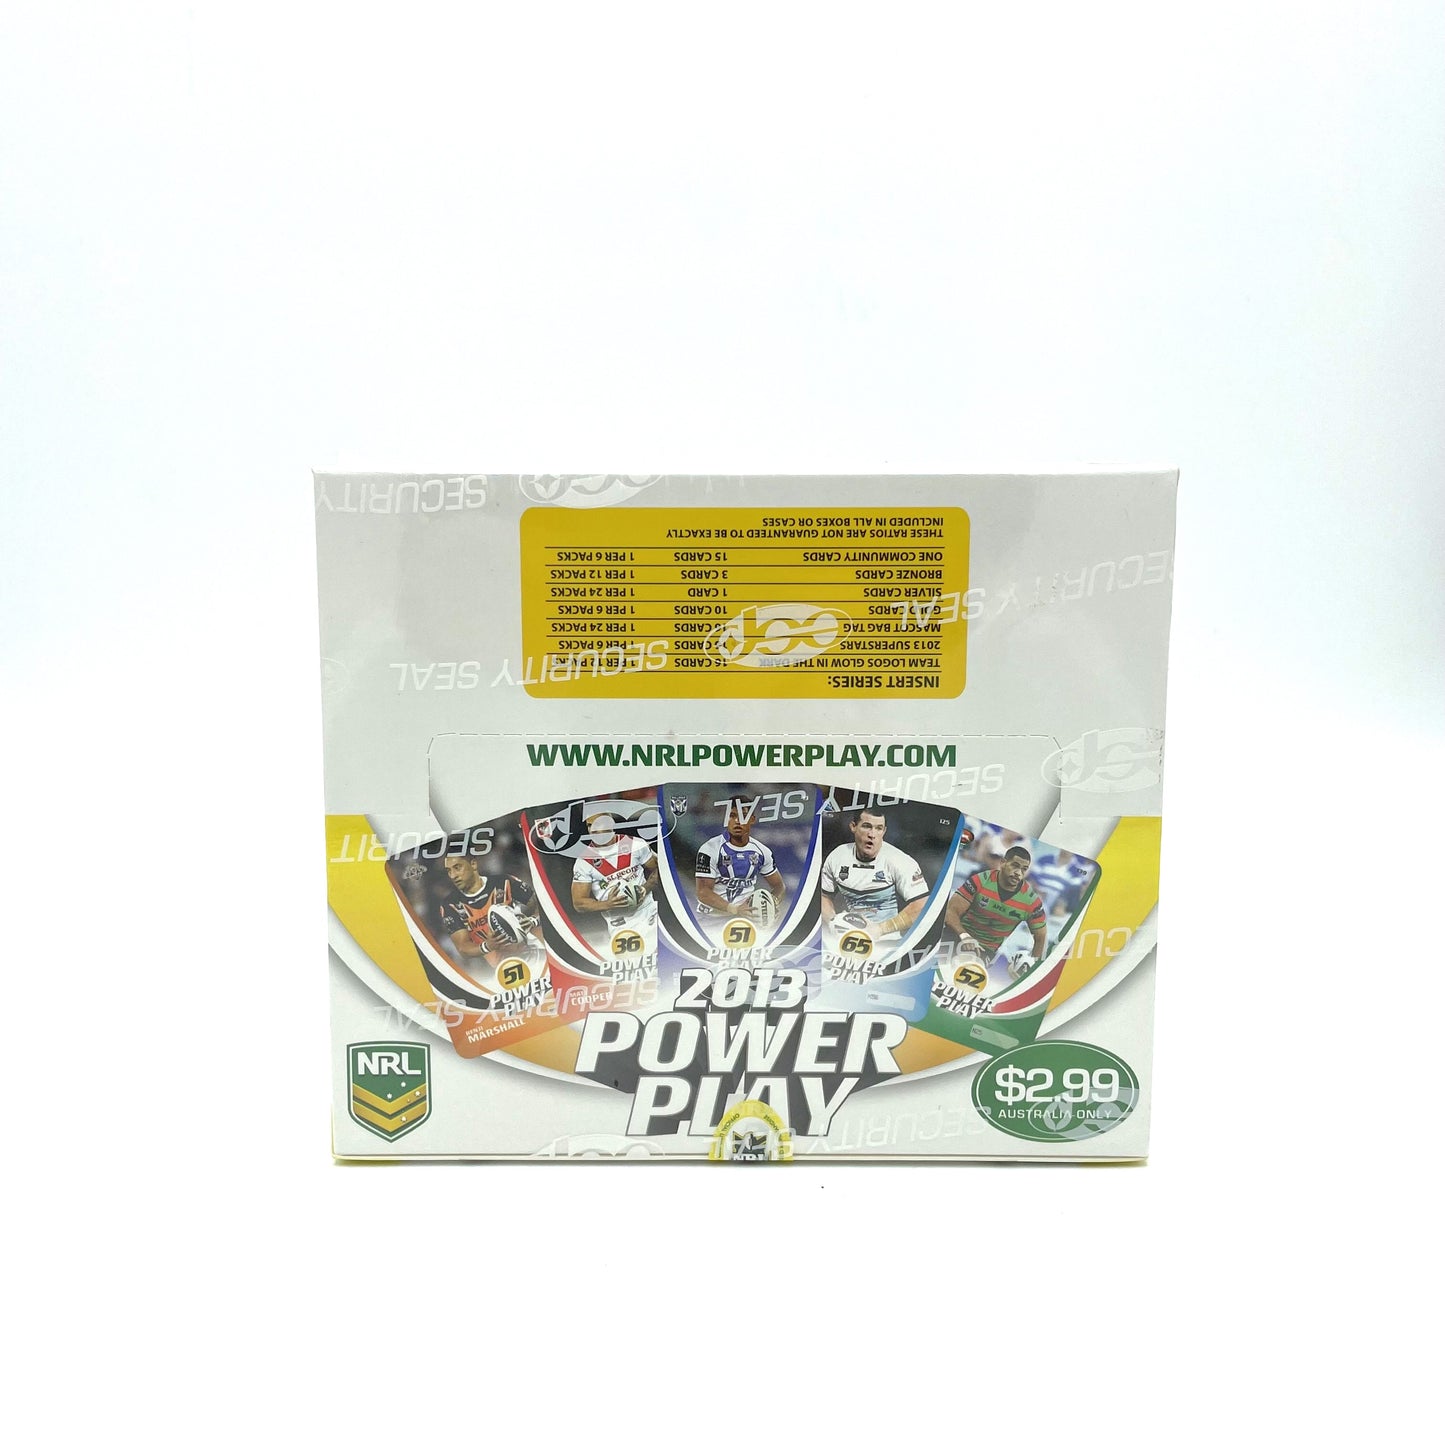 NRL - 2013 Power Play Game Trading Cards (Sealed Box)